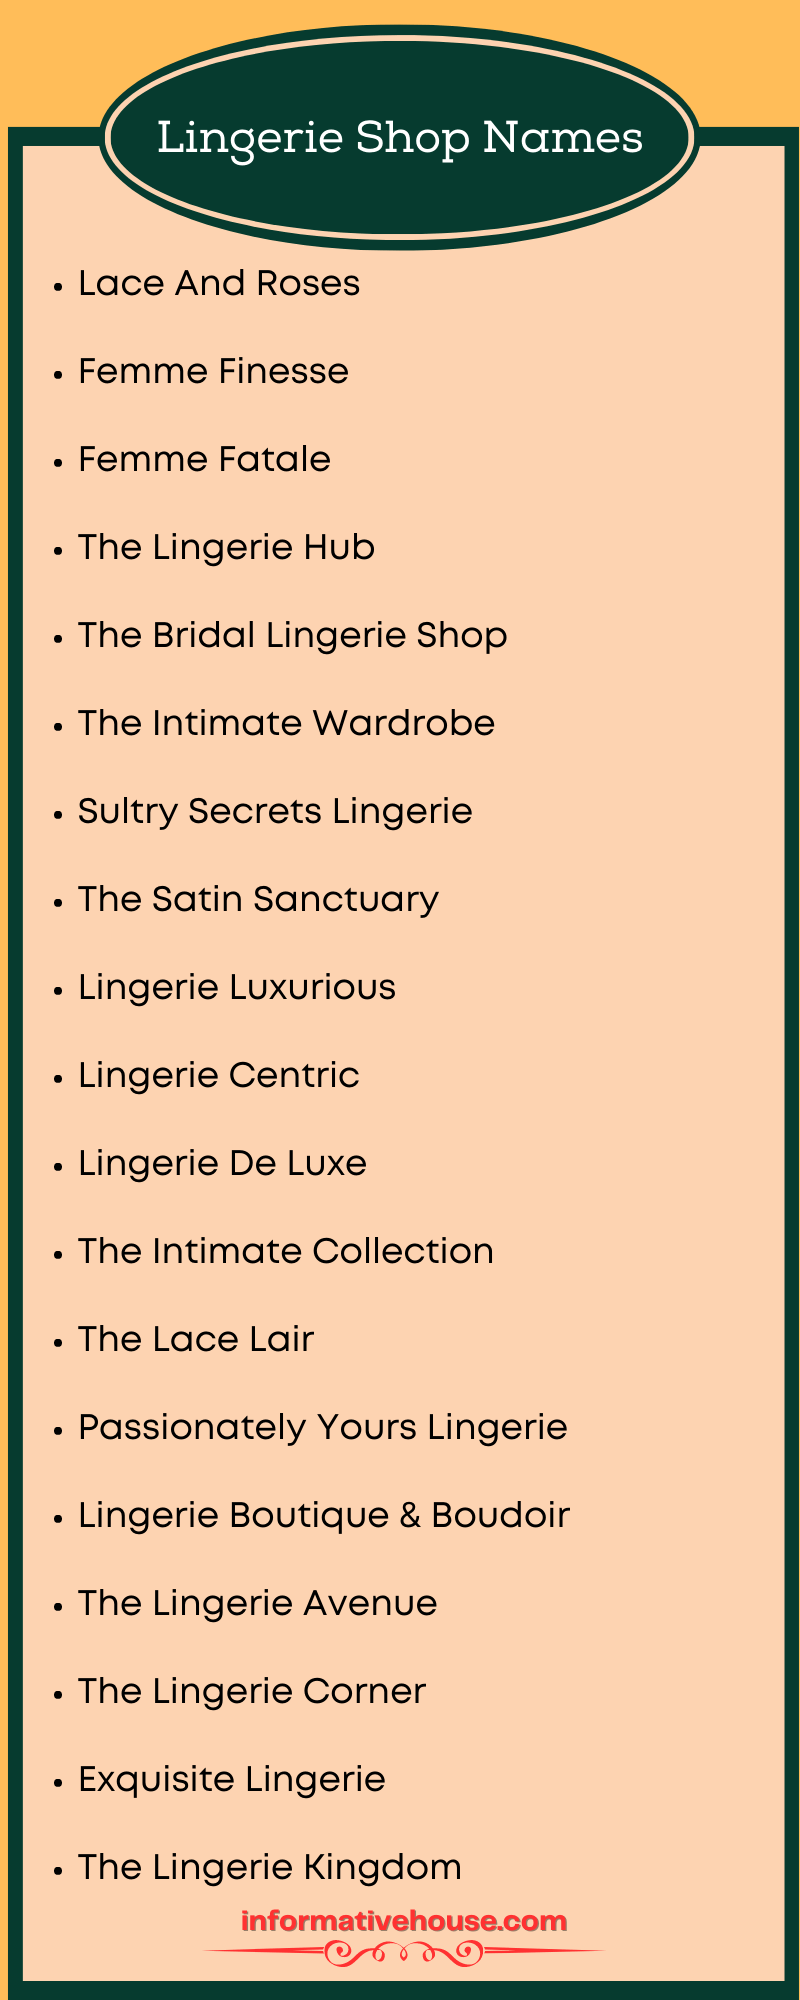 Lingerie Shop Names For Lingerie Business and Lingerie Stores